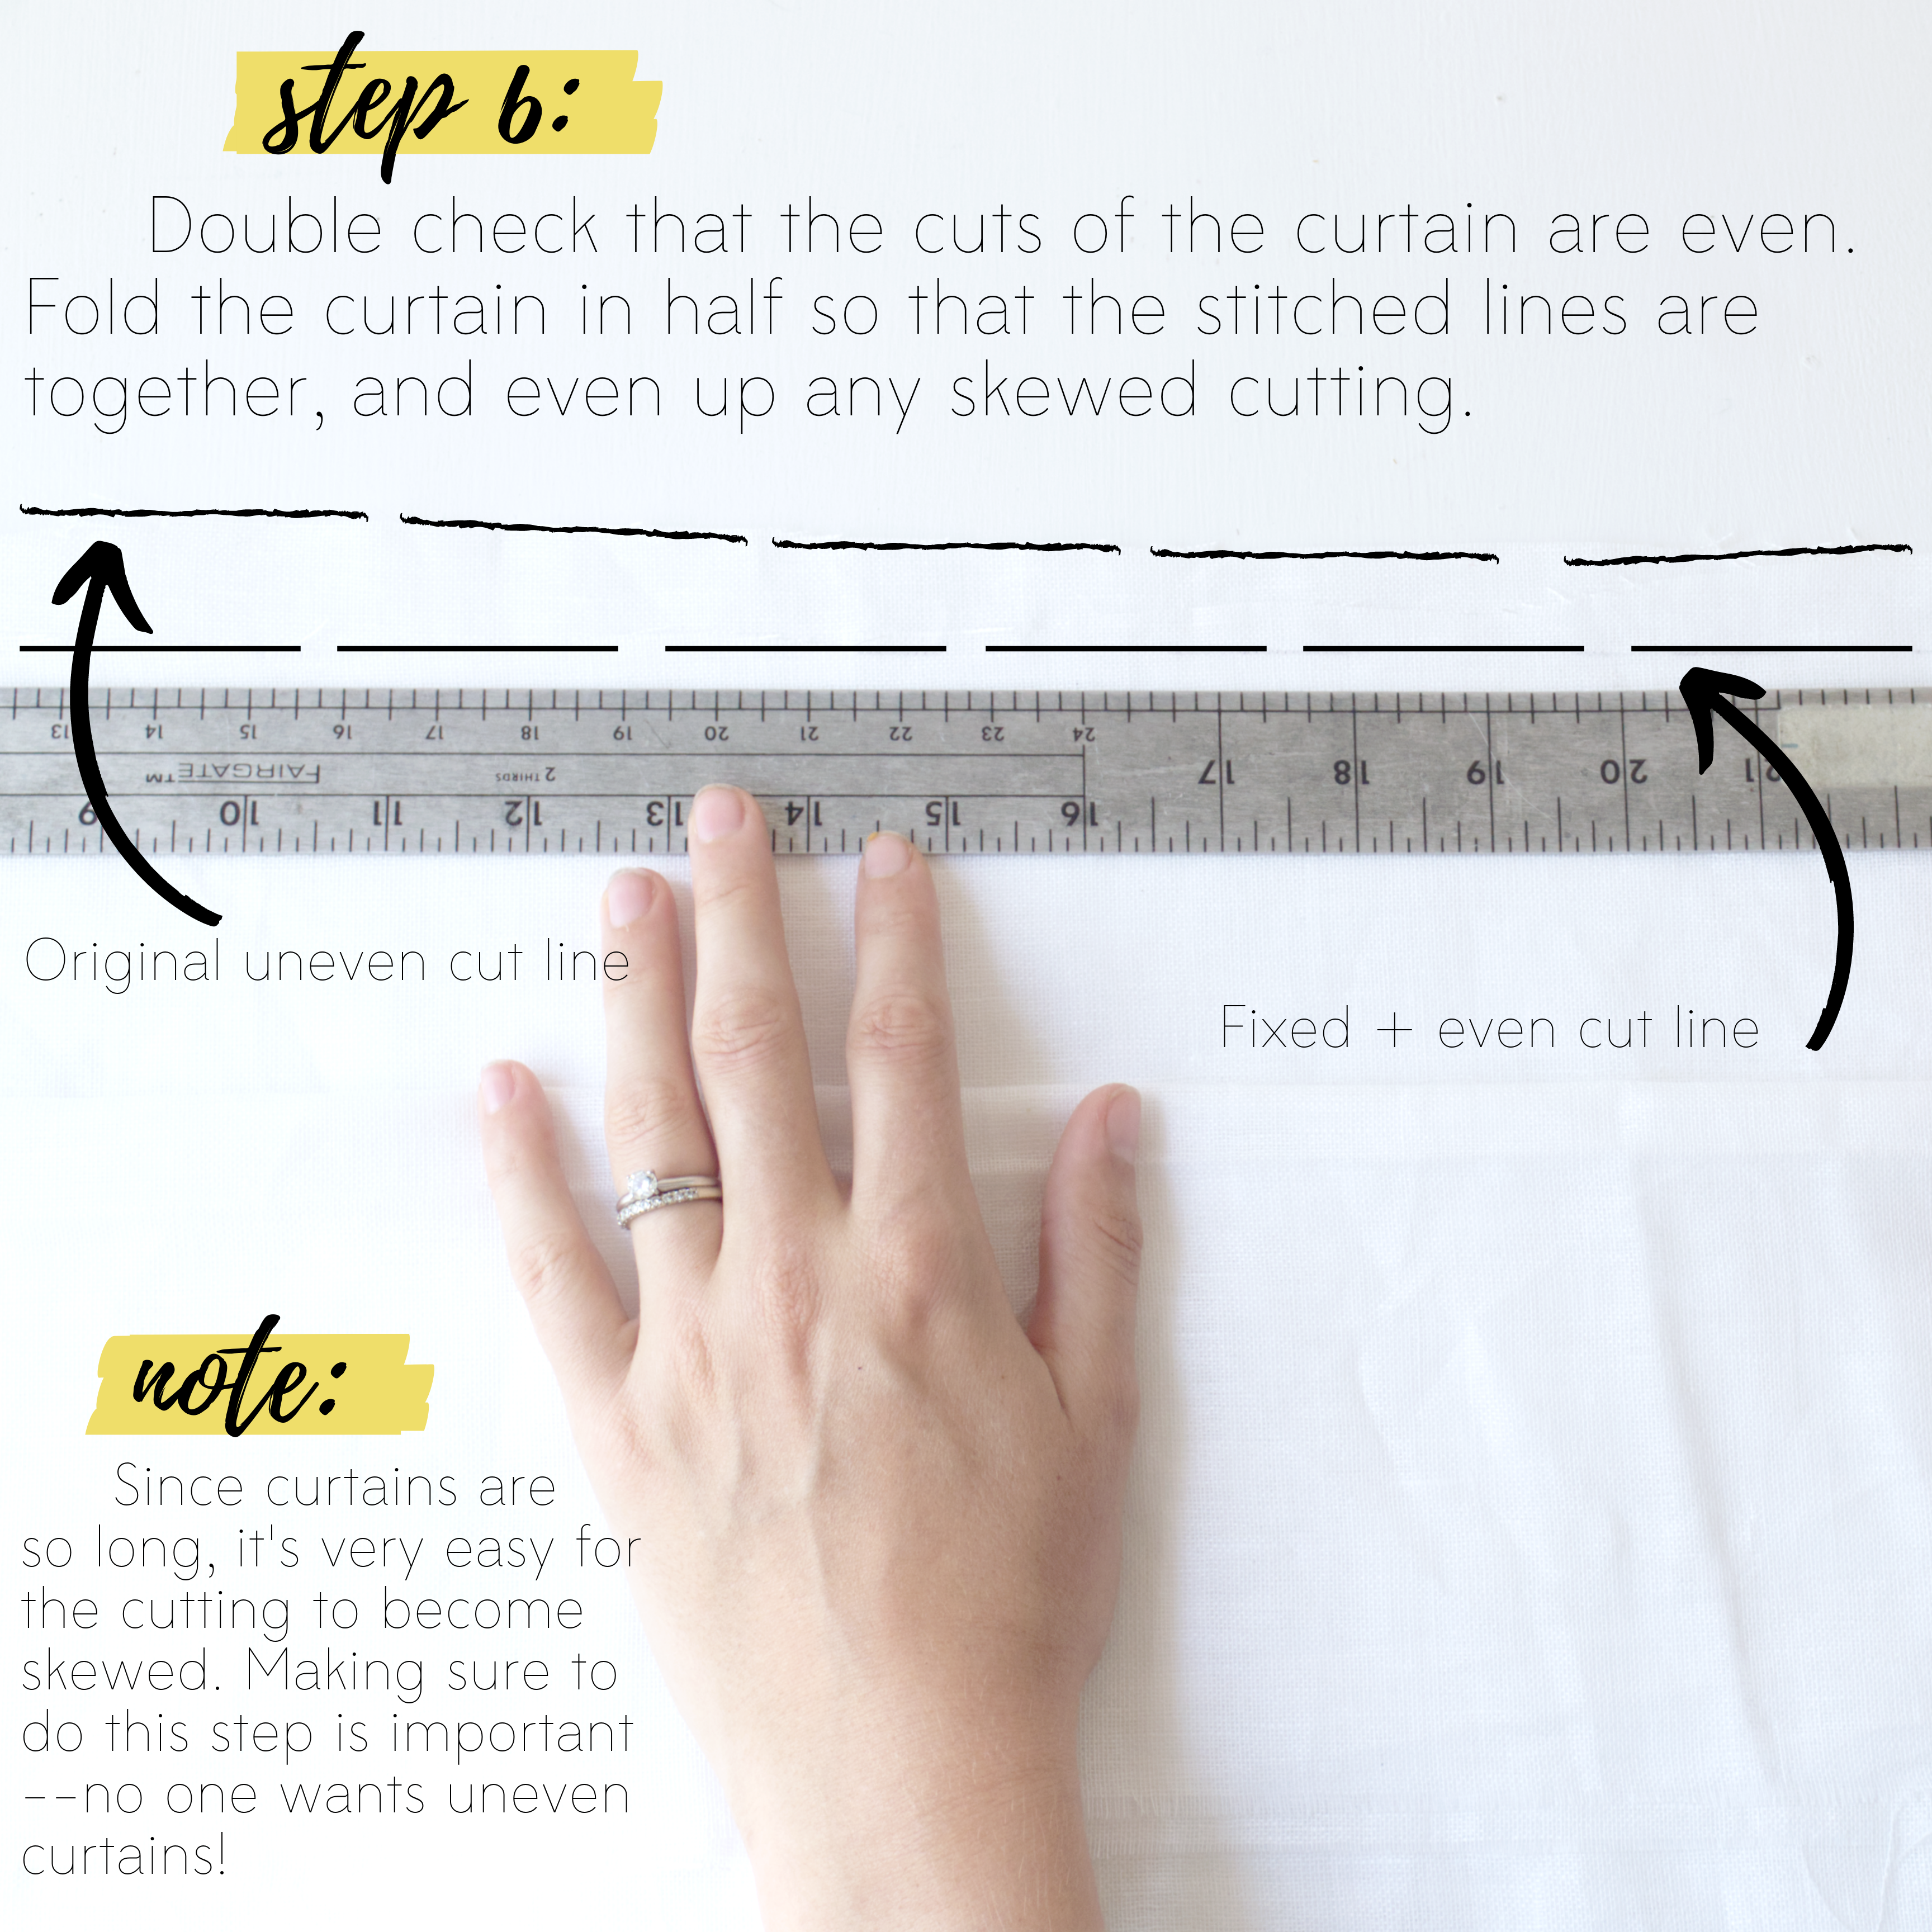 How to sew easy curtains DIY sewing tutorial: Step 6